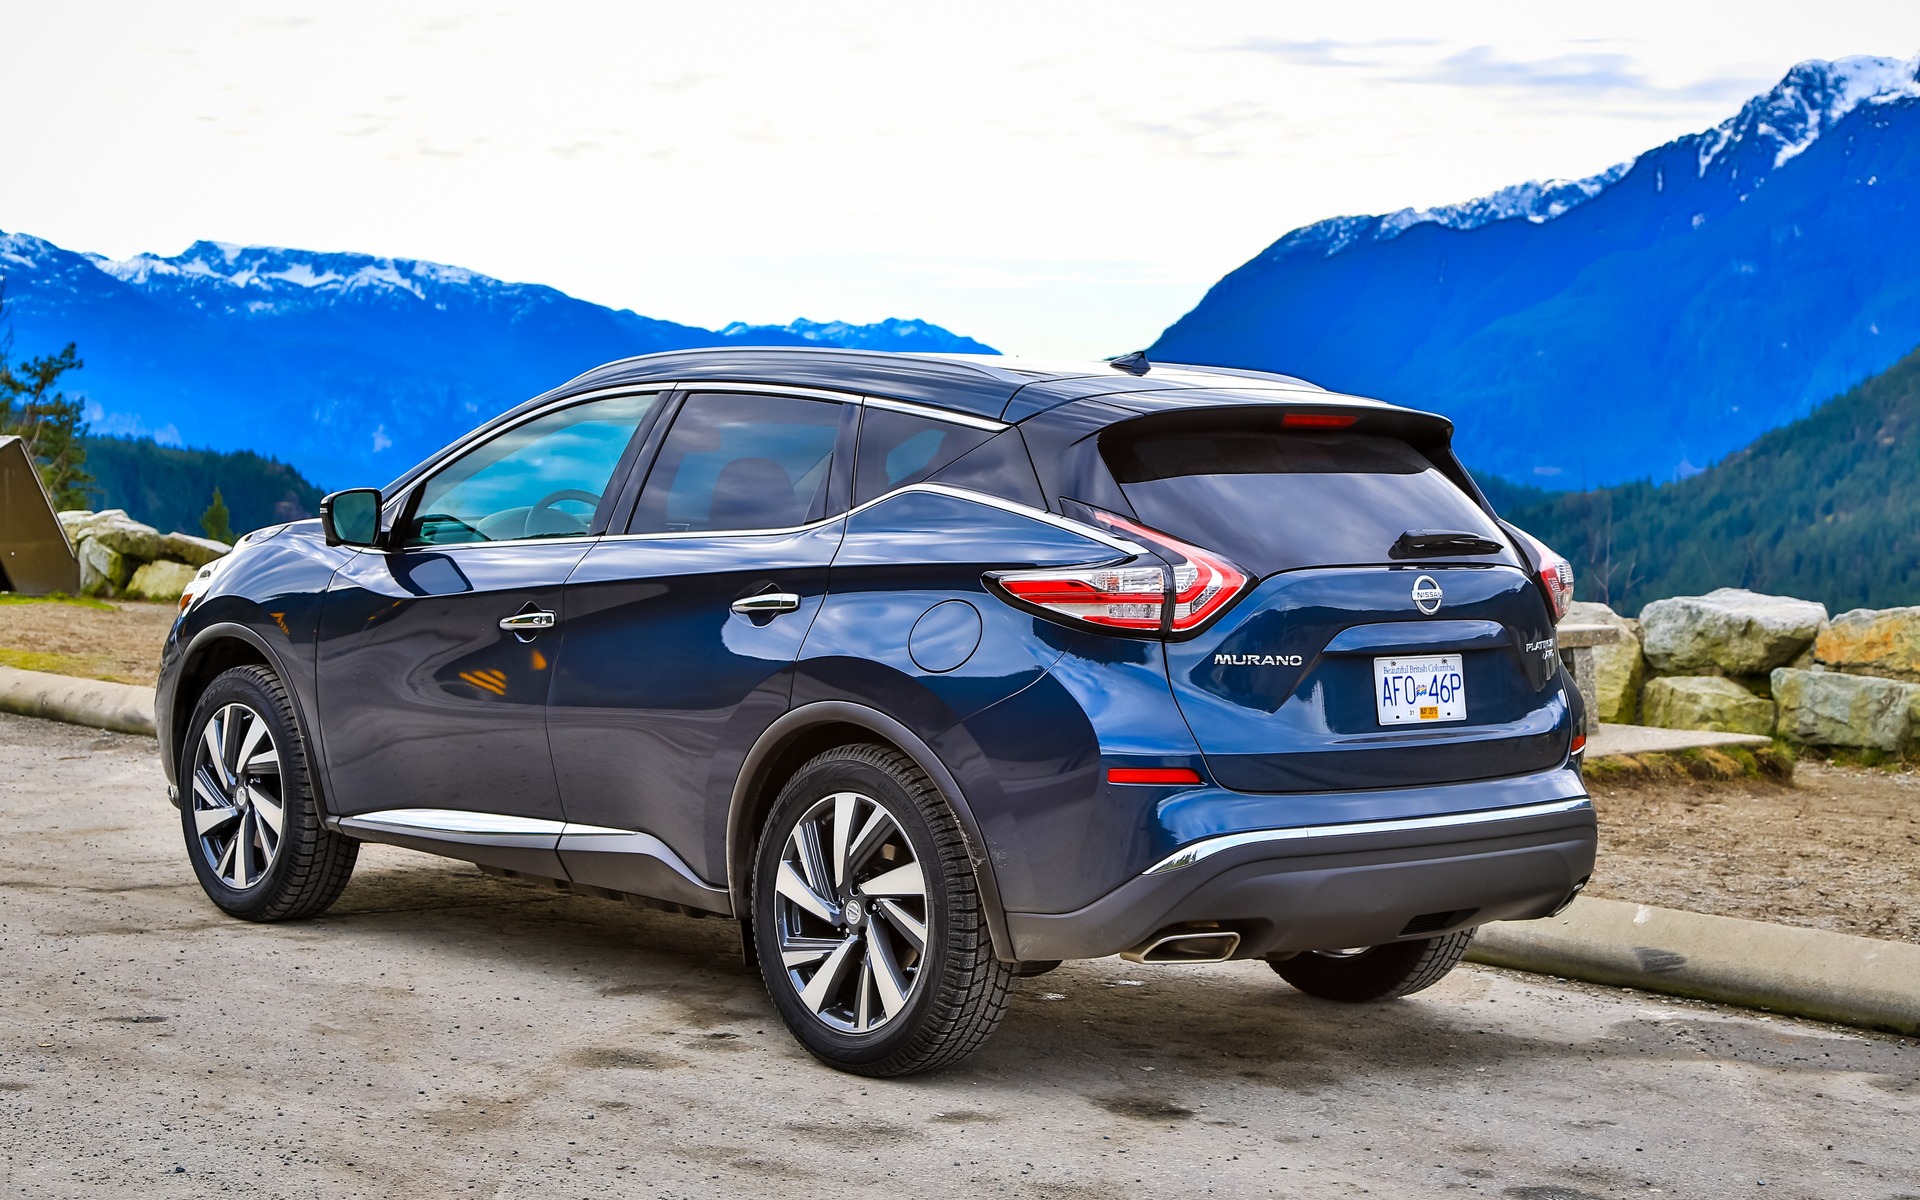 Nissan murano model differences #2